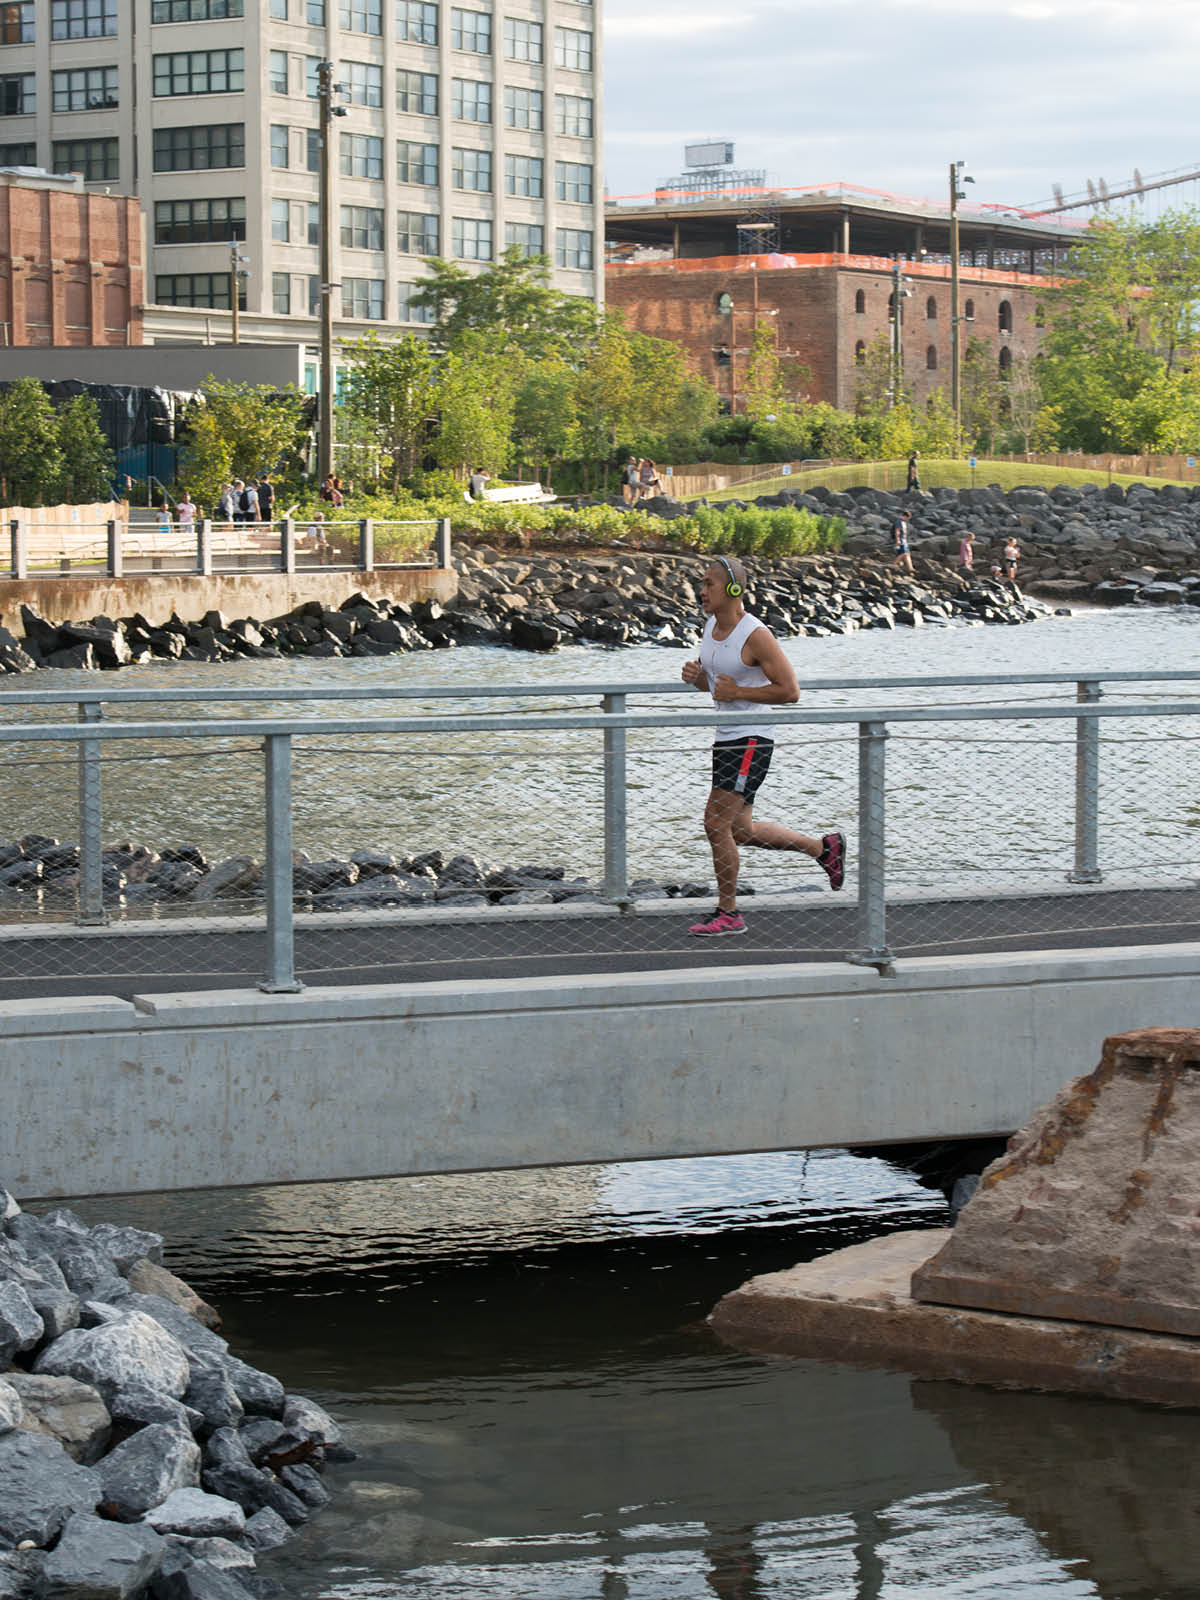 Man running on pedestrian walkway over the water on a sunny day.